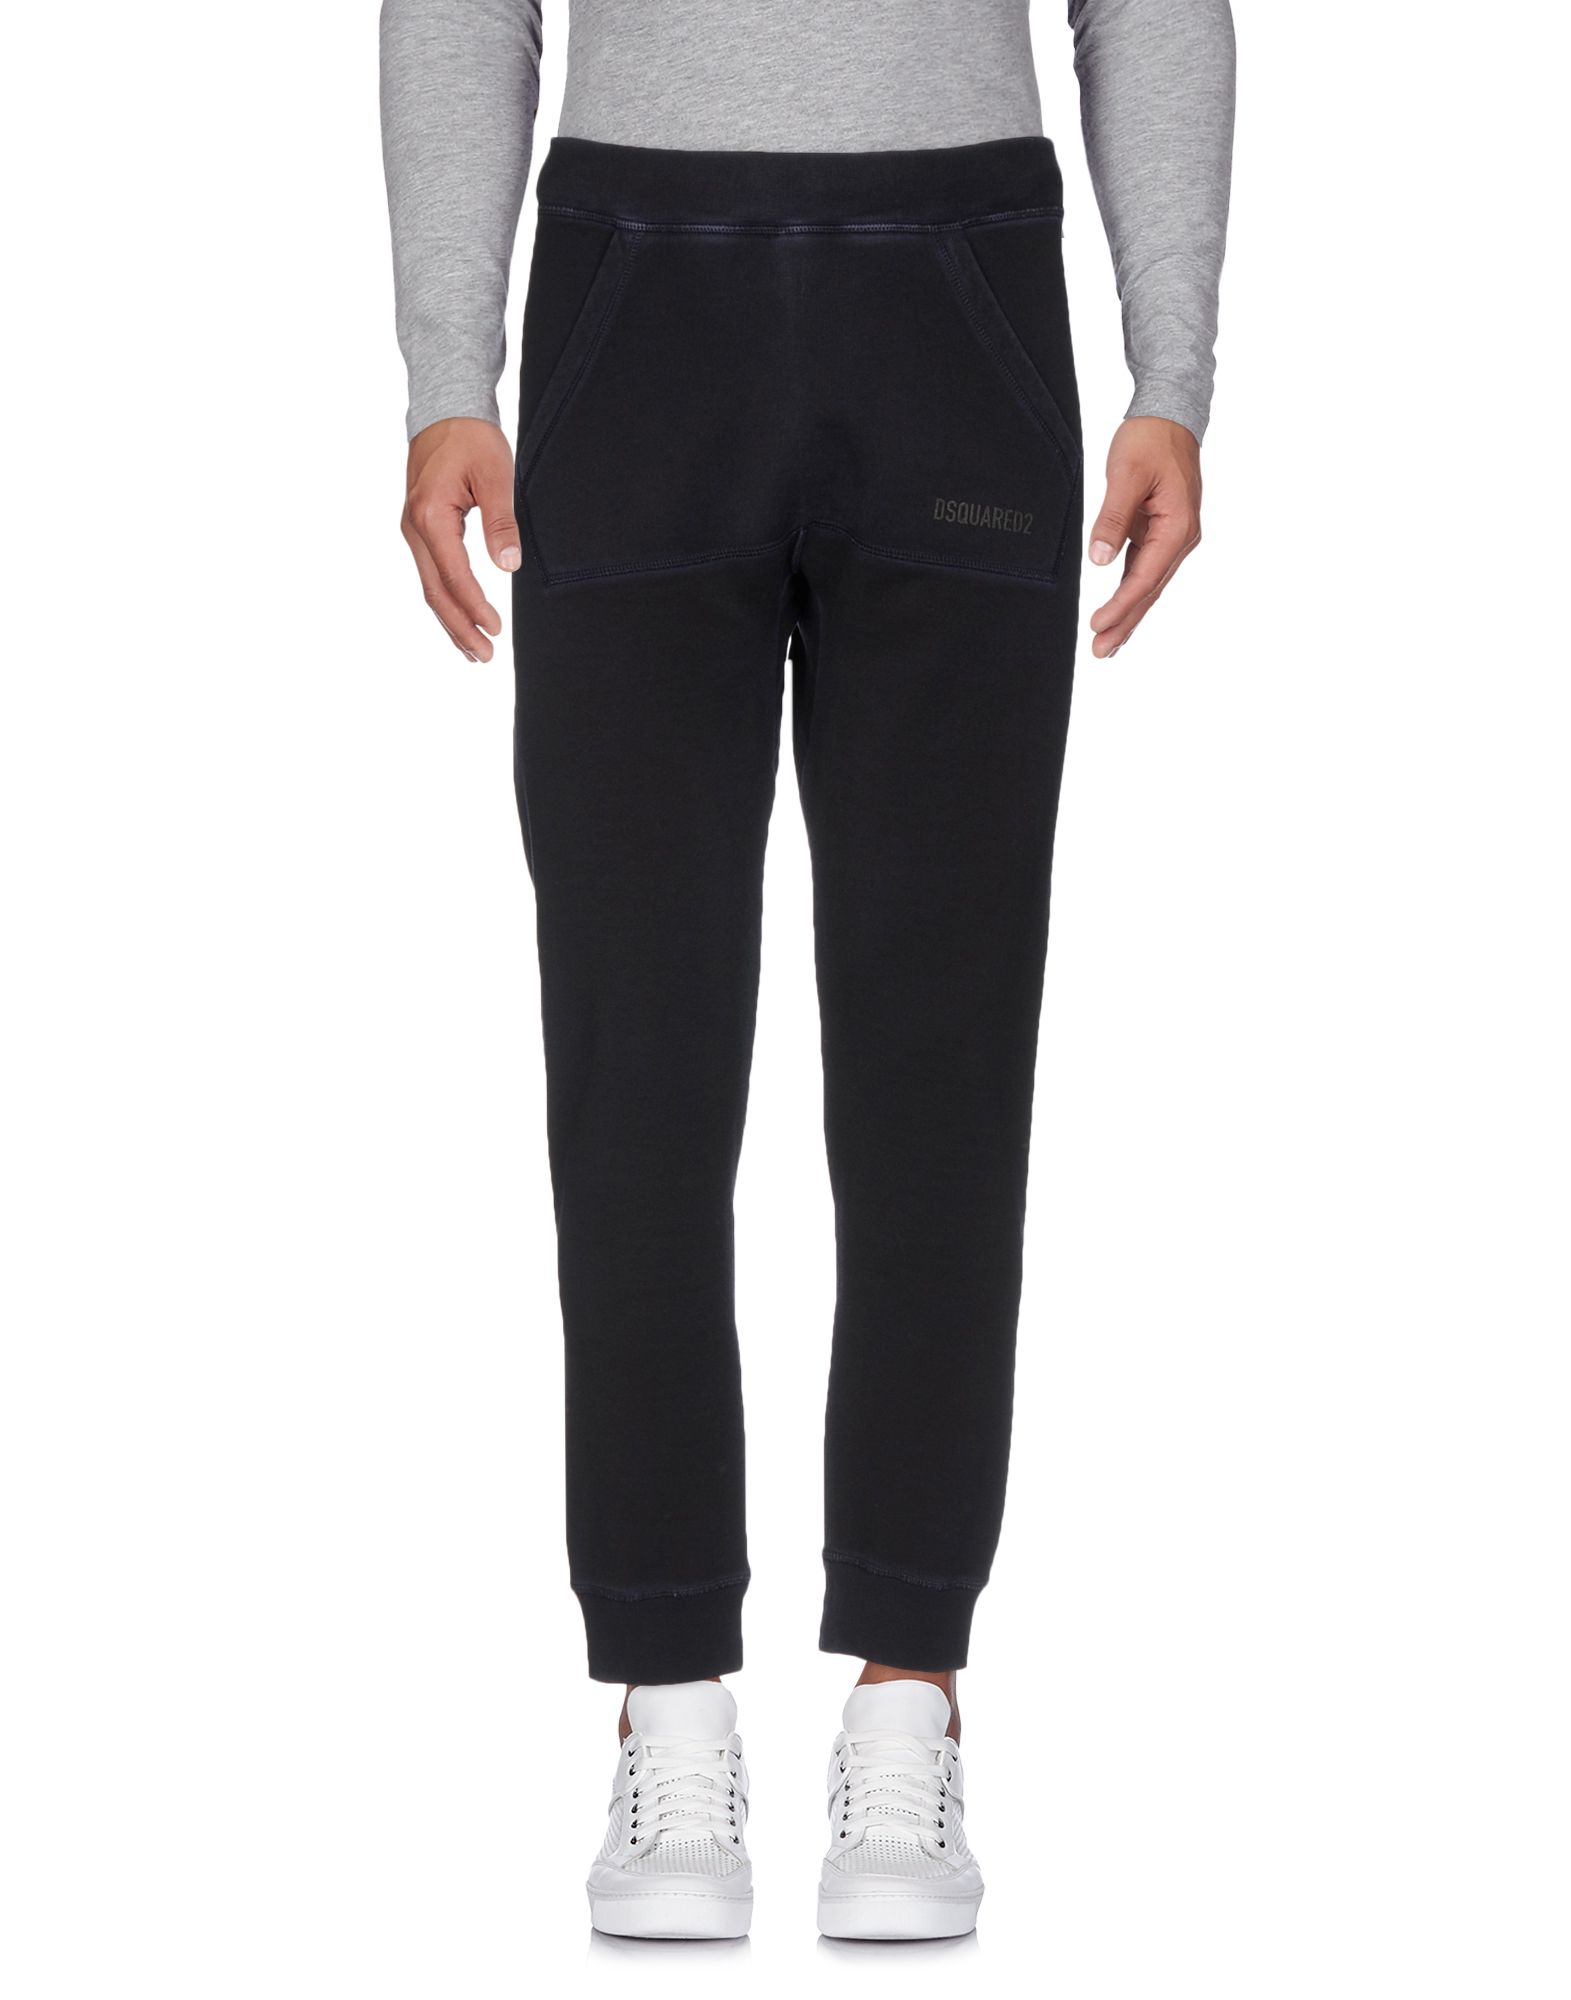 DSQUARED2 trousers,13178949CW 5